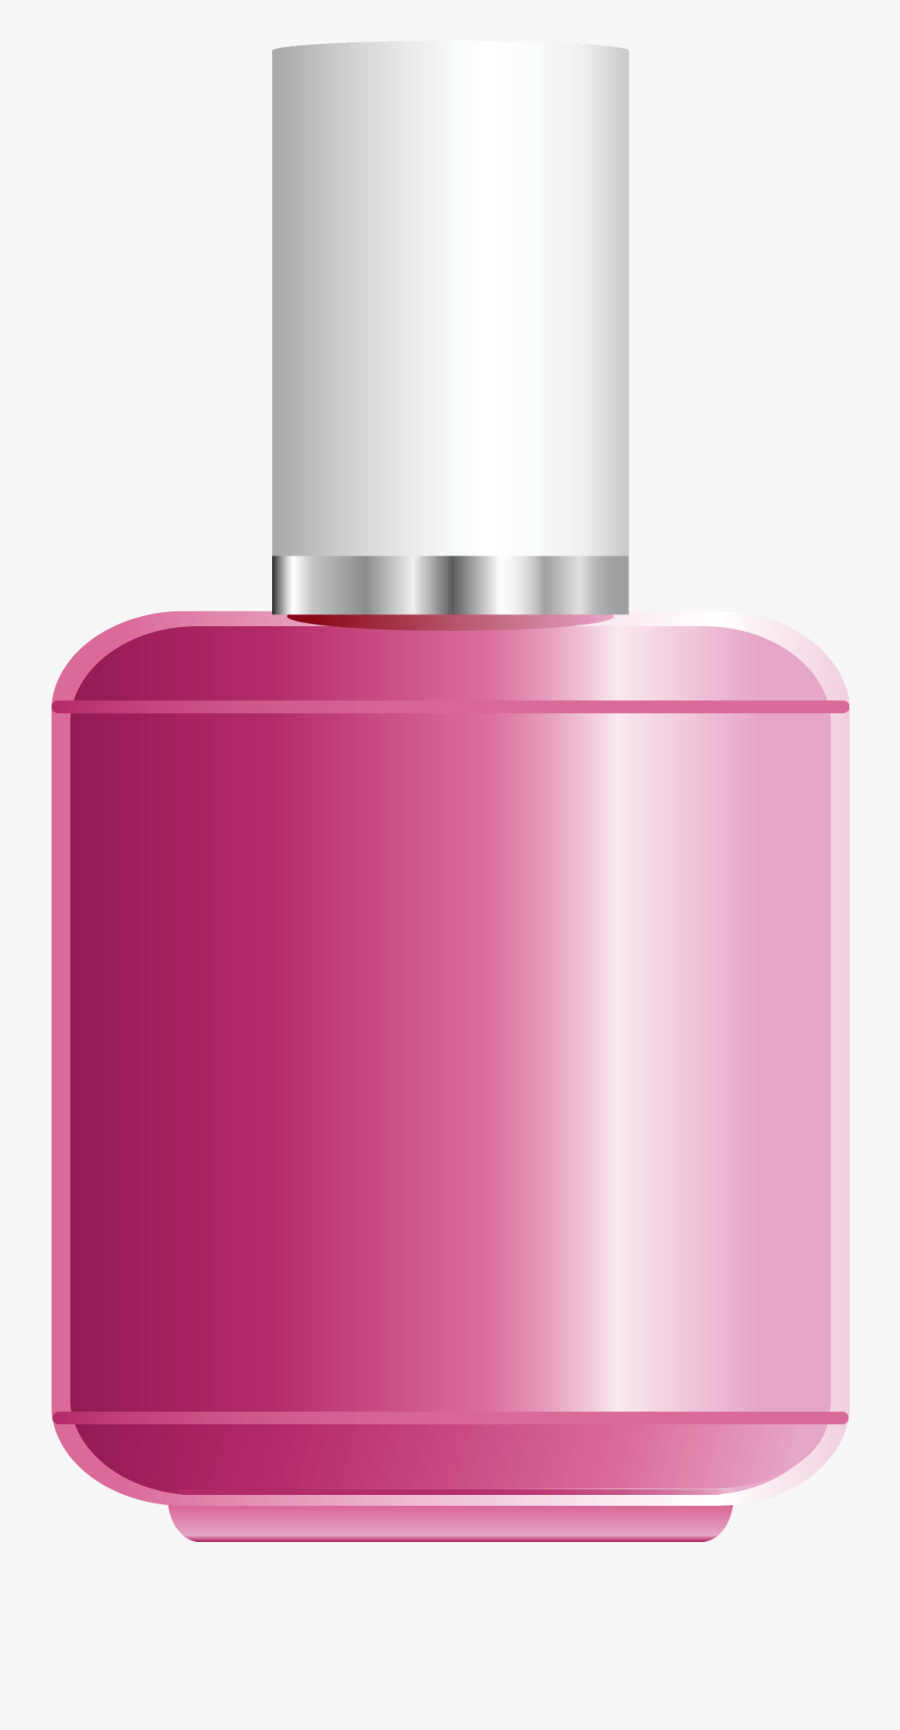 Clipart Of Nail Polish Bottle Tips And Clipart Of Nail - Pink Nail Polish Png, Transparent Clipart